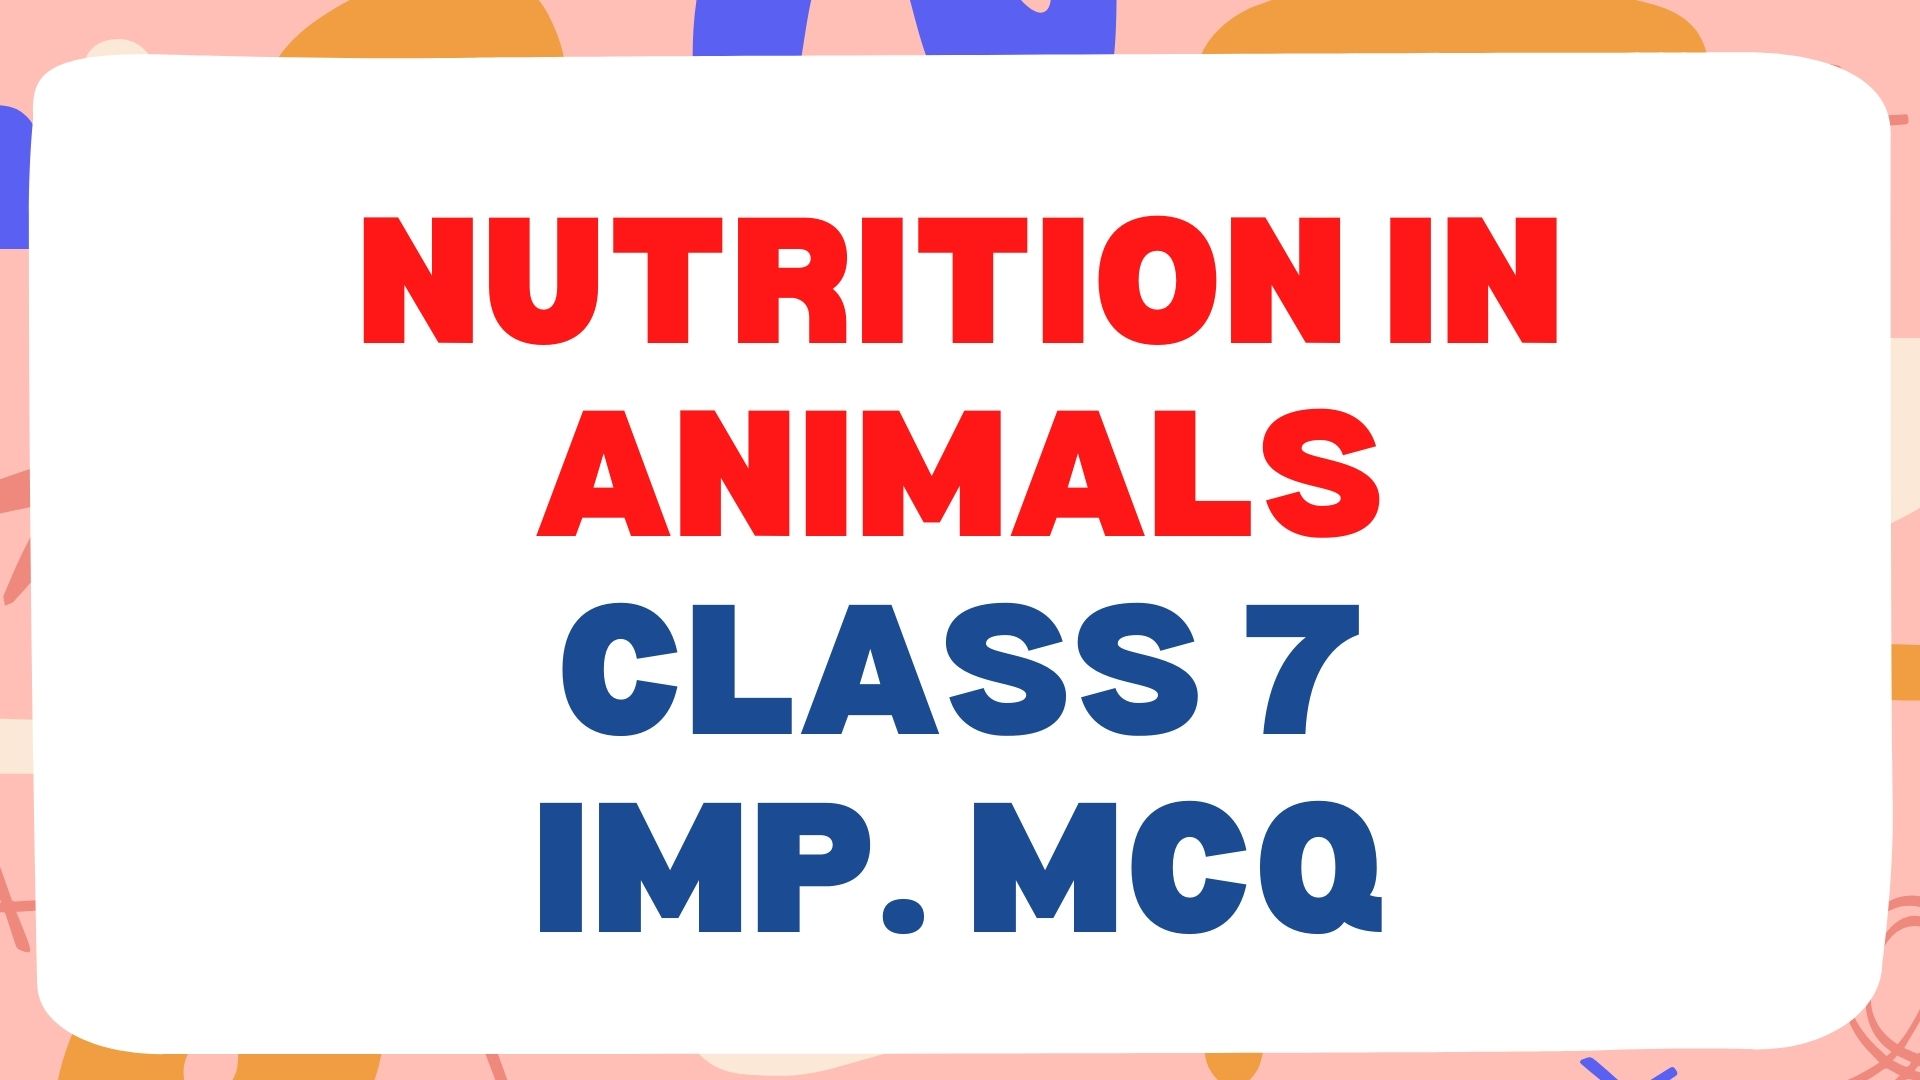 Nutrition in Animals Class 7 MCQ Questions and Answers